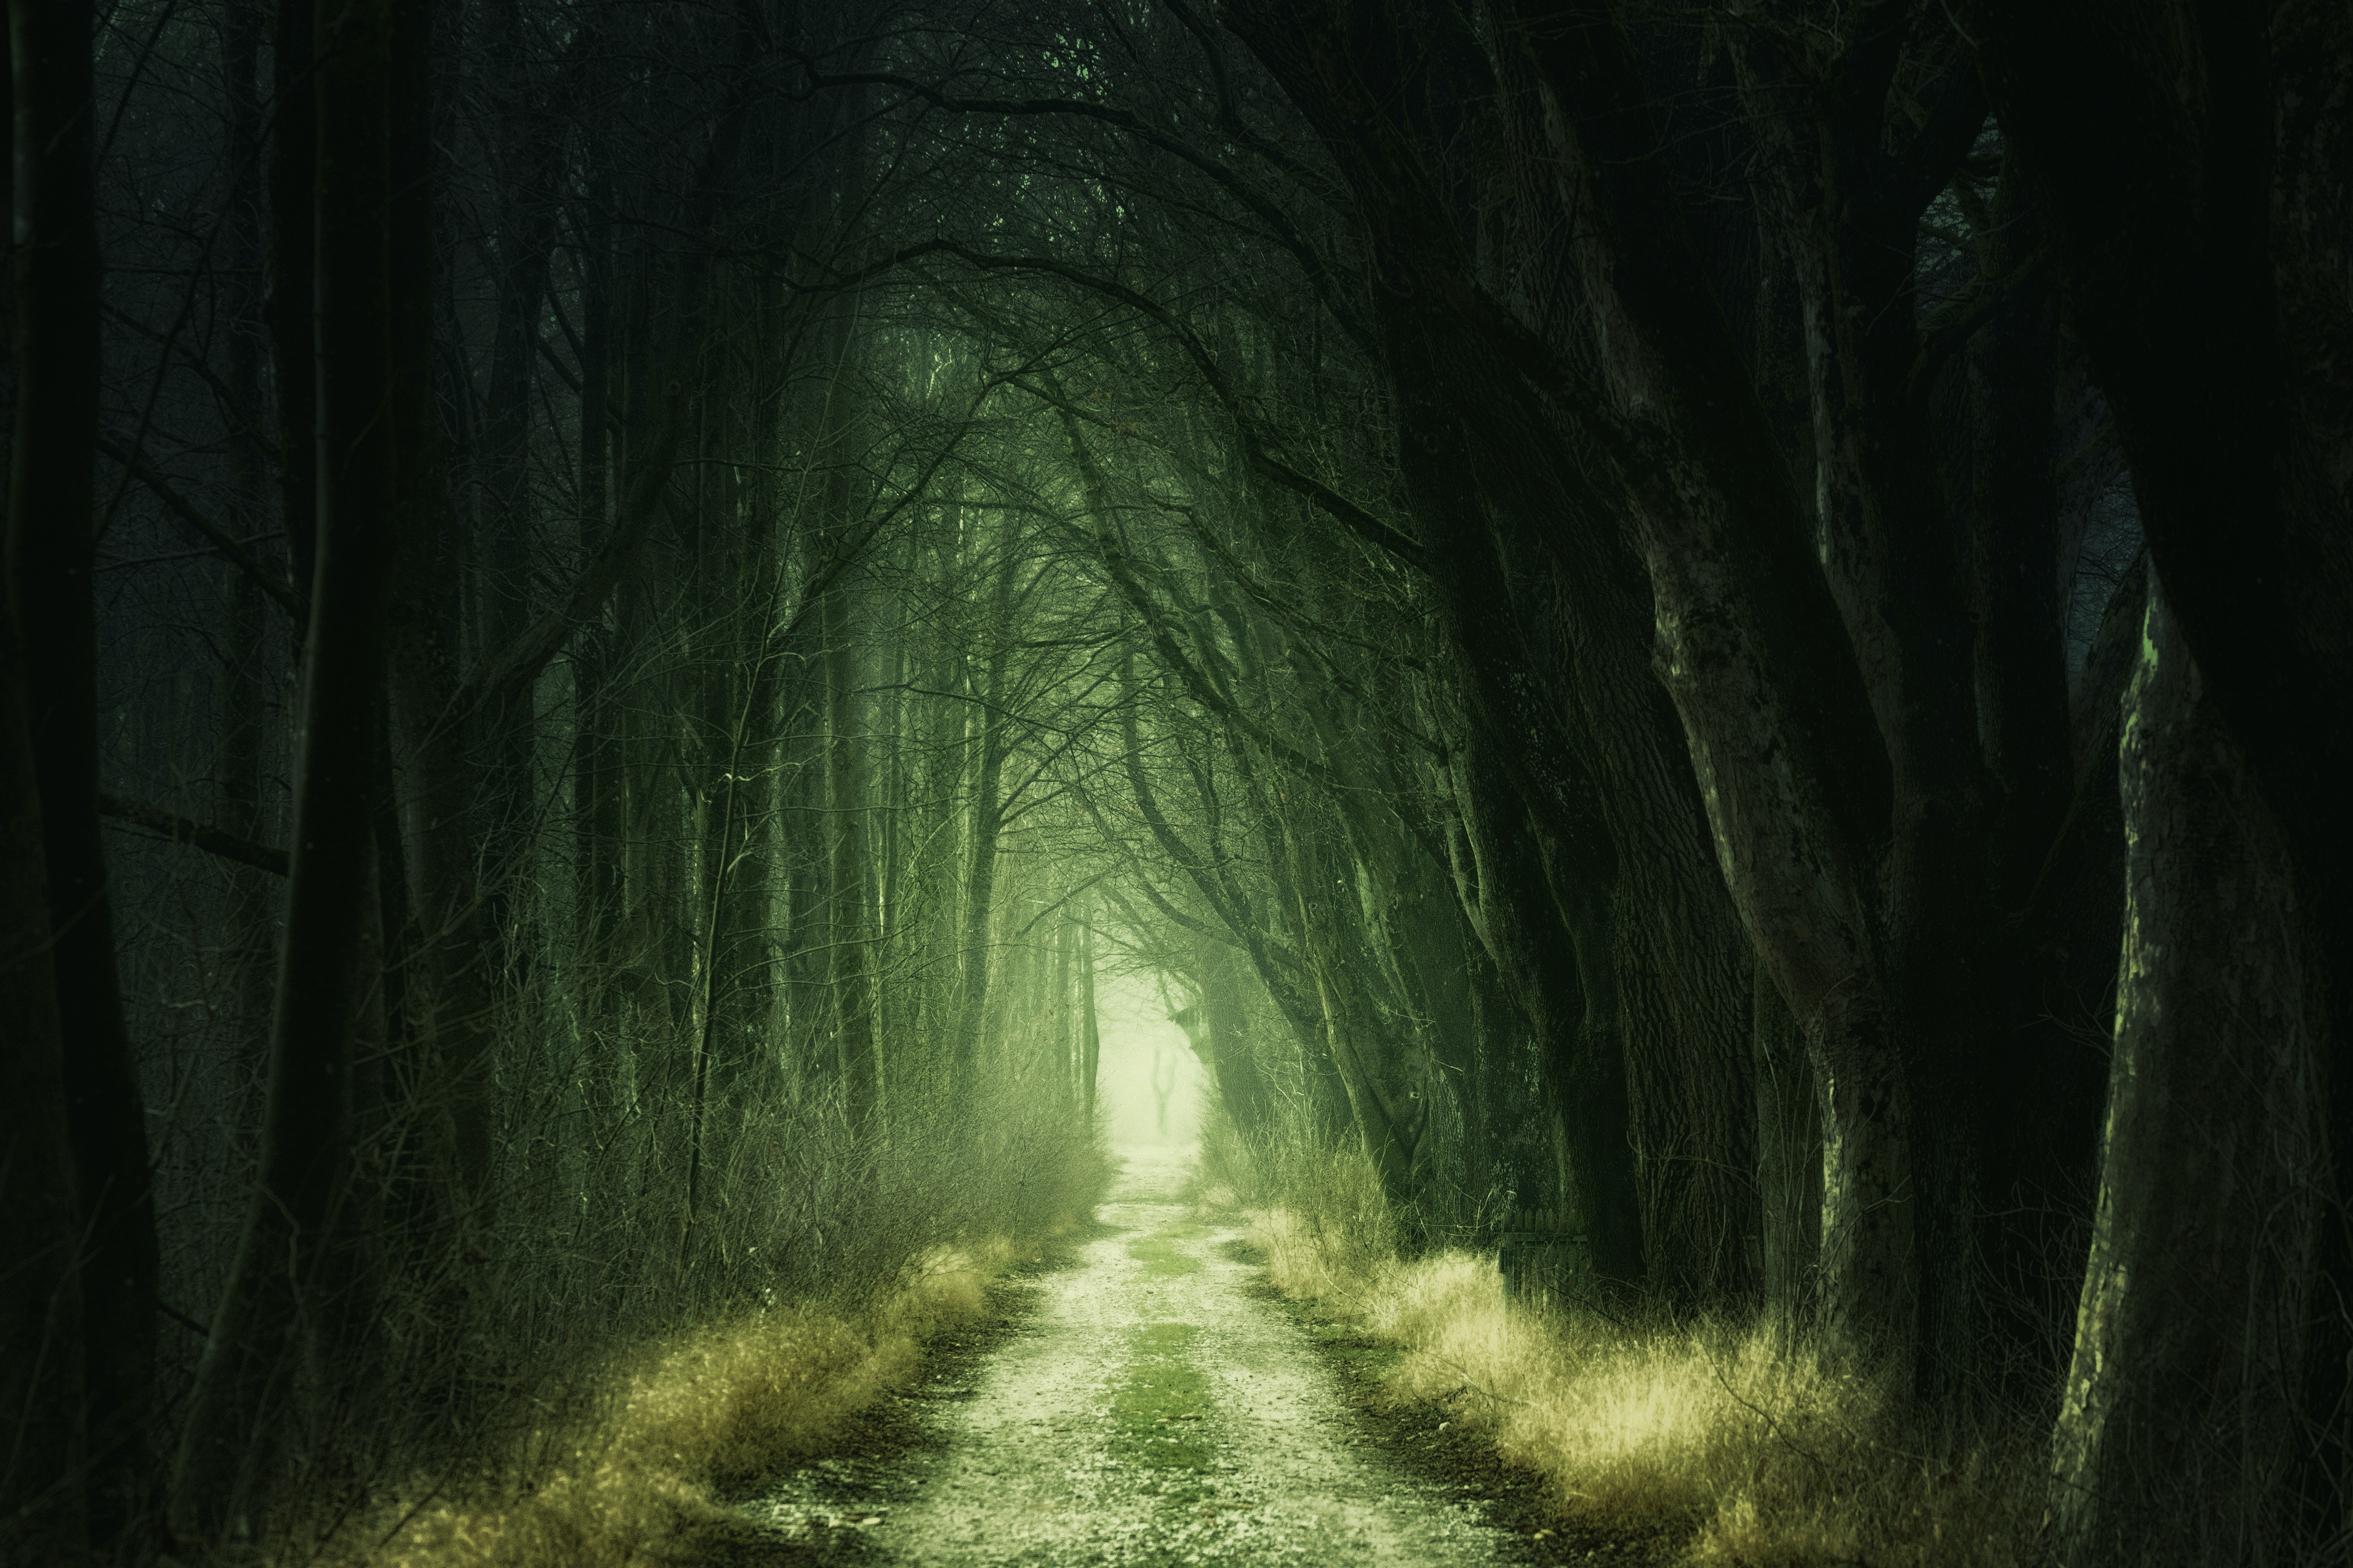 HD wallpaper, Aesthetic, Path, Forest, 5K, Green, Calm, Fall